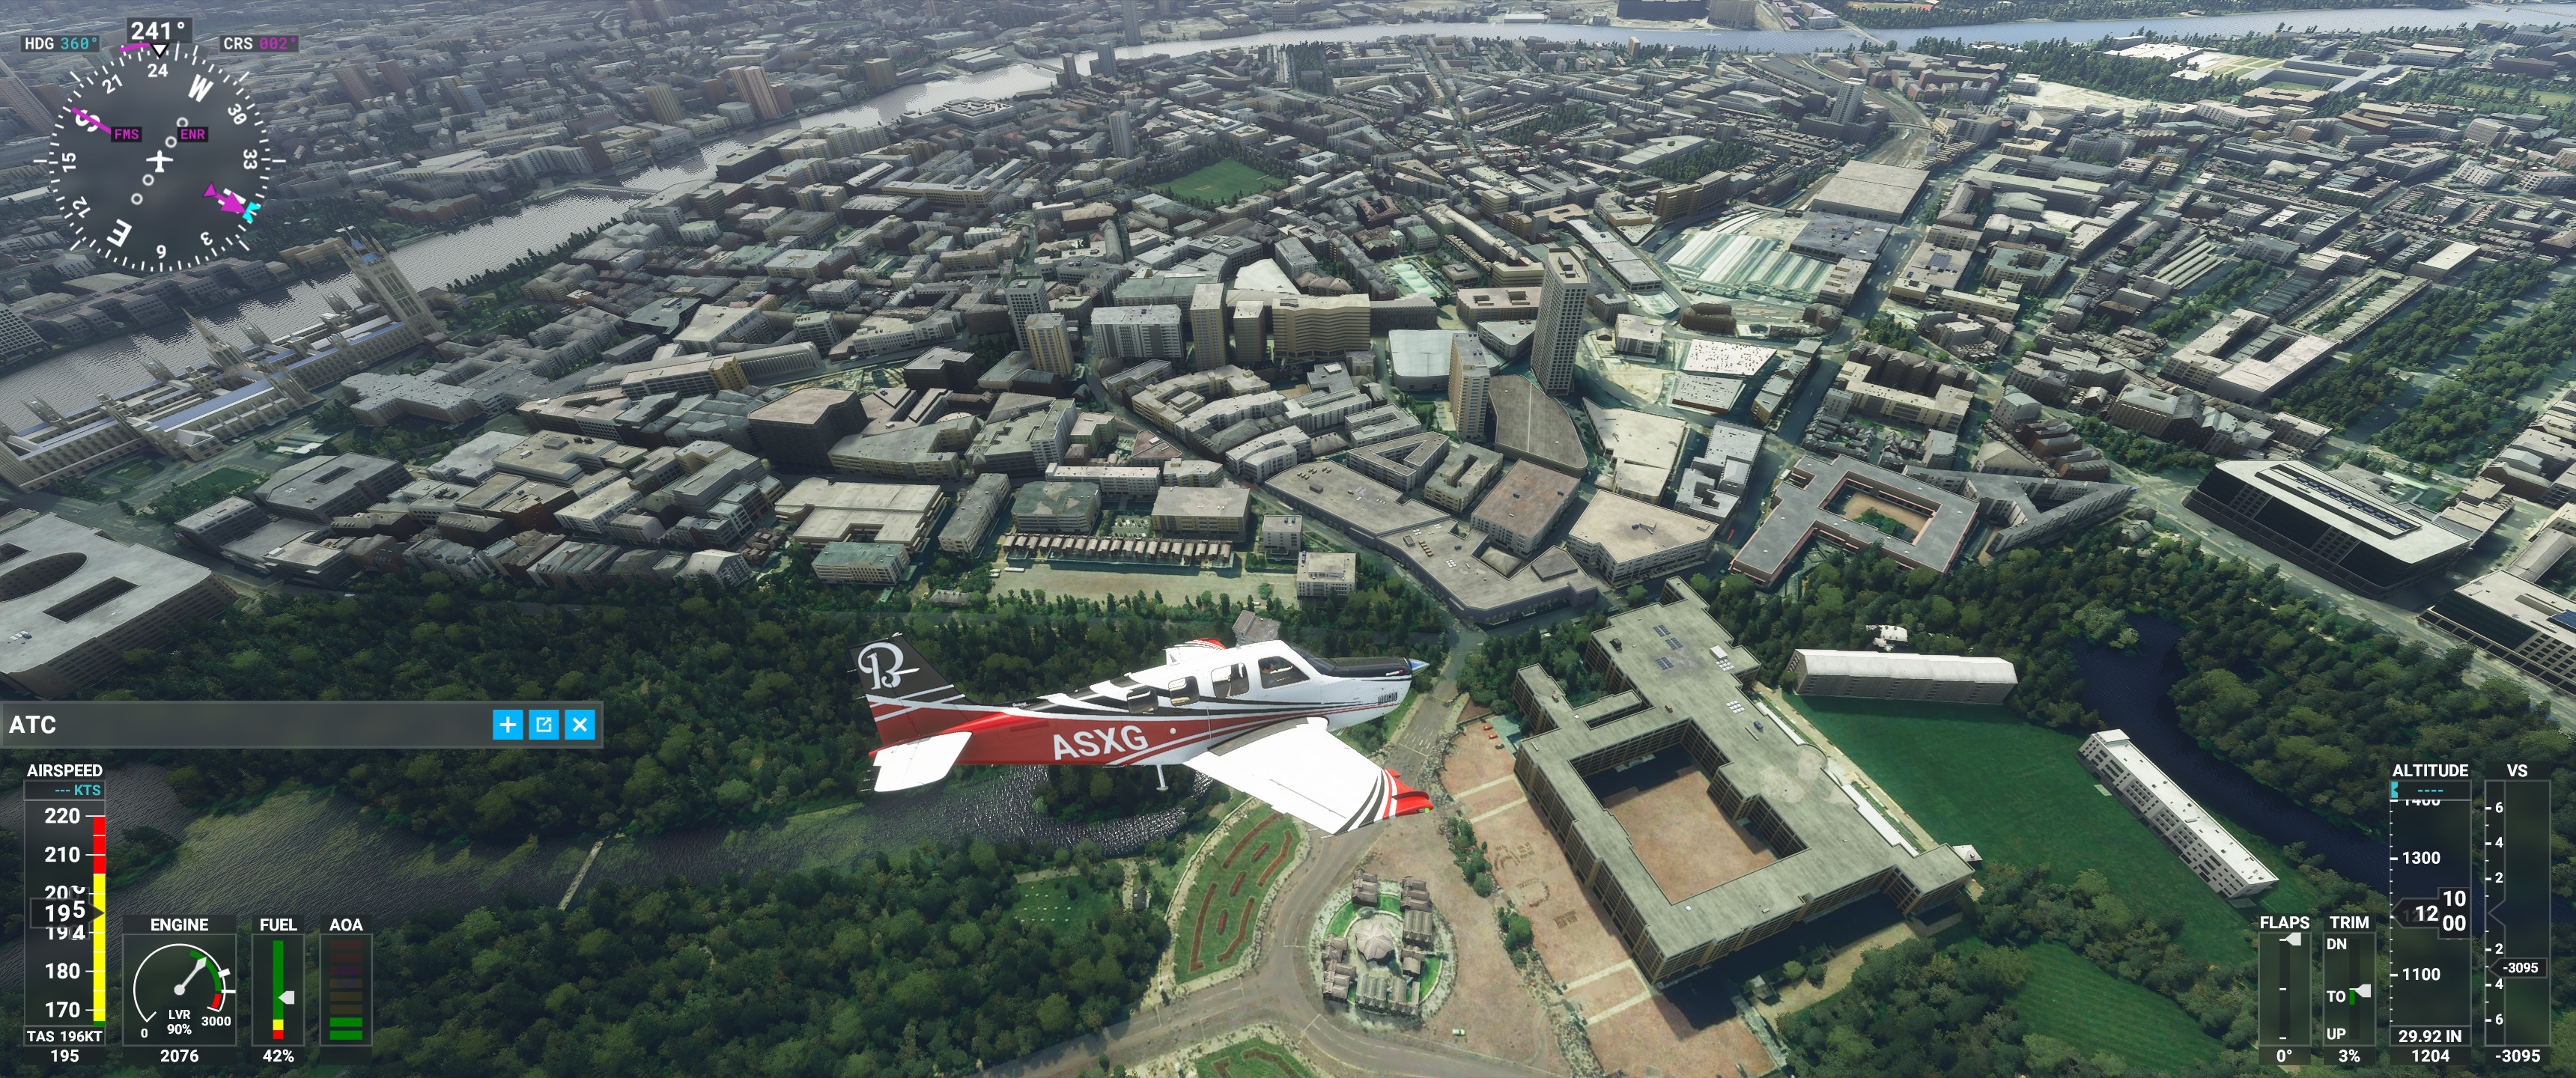 I can see my house from here! Microsoft Flight Simulator has laid strong  foundations for the nerdy scene's next generation • The Register